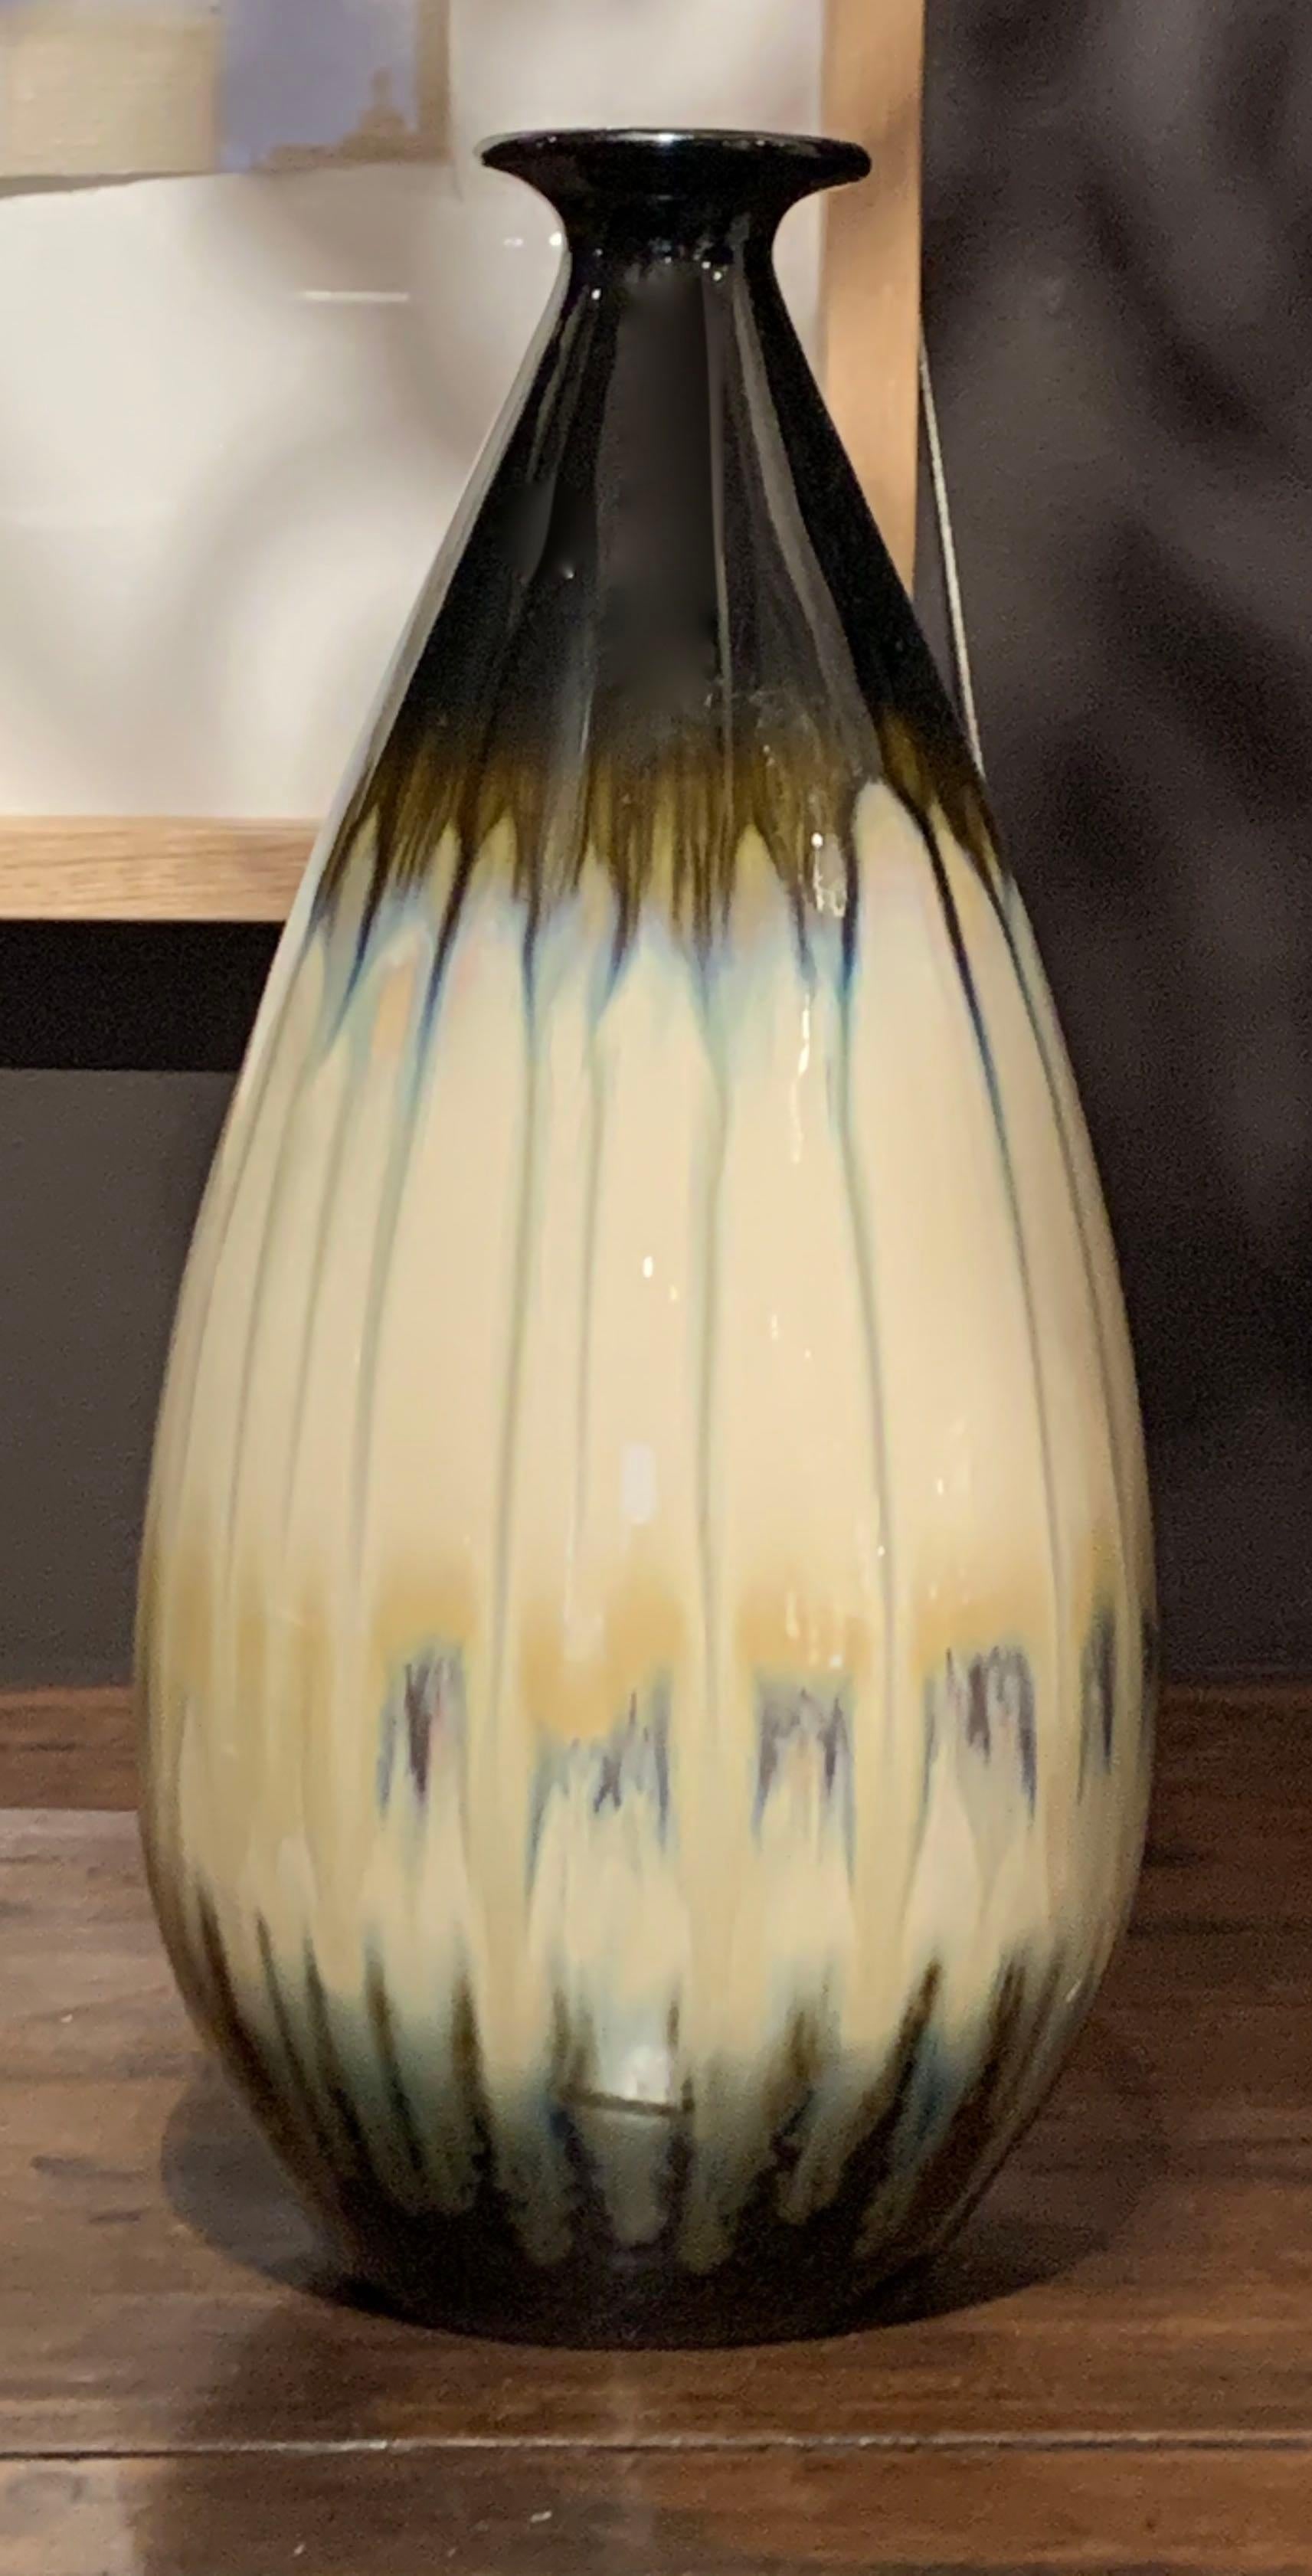 Contemporary Chinese ceramic vase with decorative drip glaze.
Cream ground with shades of brown and black.
Dark brown at the top and bottom with a cream center and light brown horizontal drip glaze.
Two available and sold individually.
